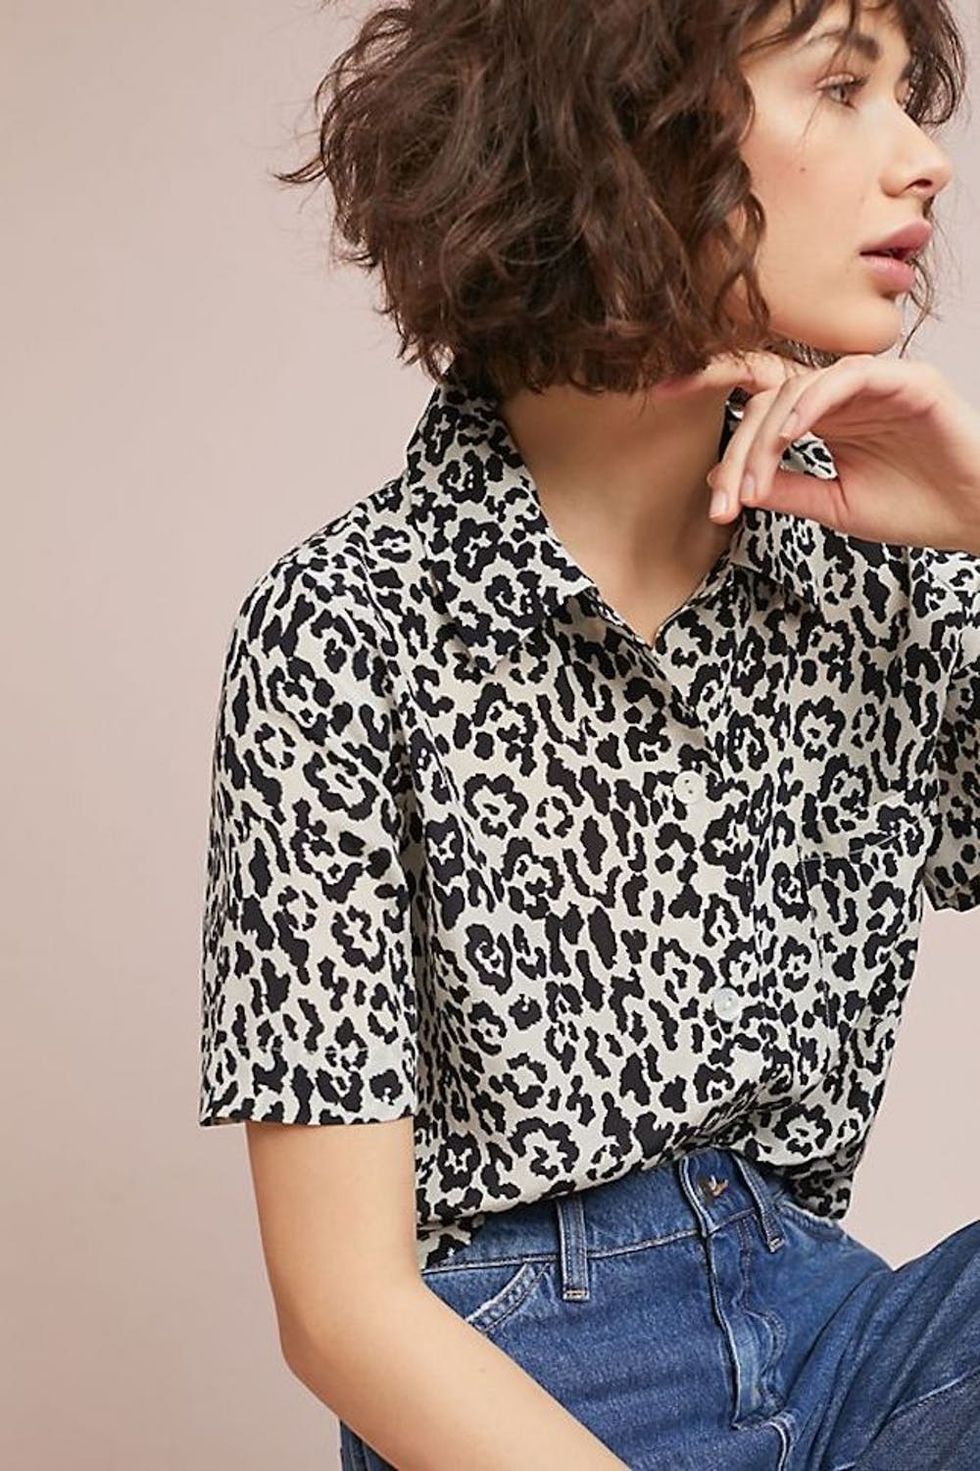 Leopard Print Is Secretly Spring 2018’s New Neutral - Brit + Co